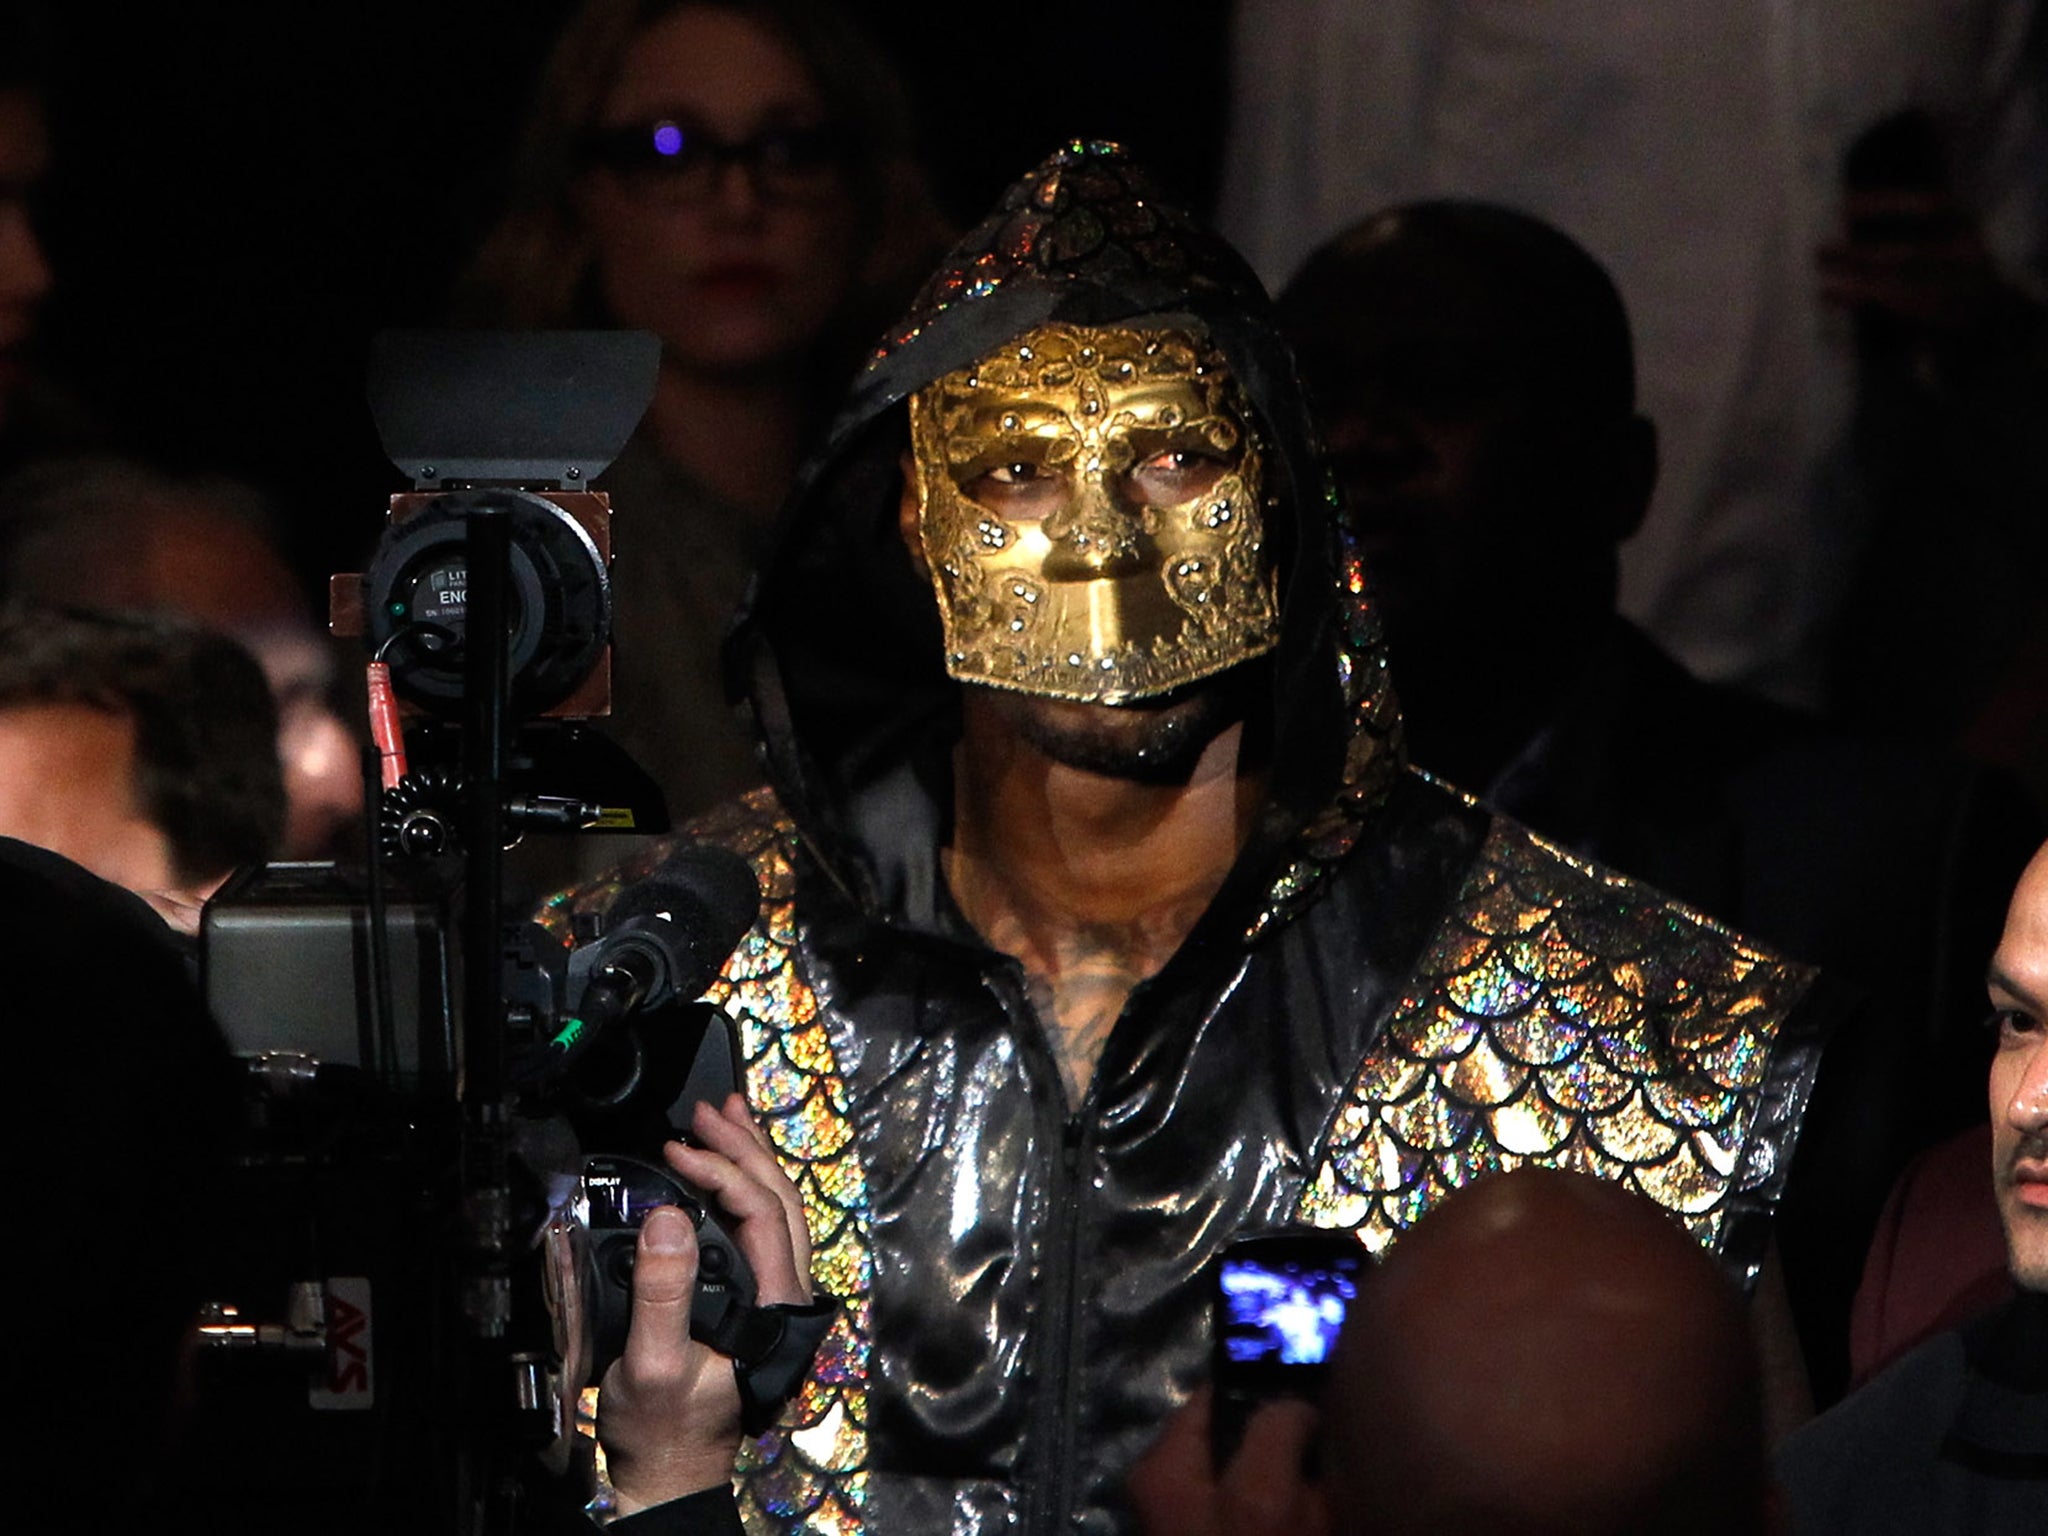 Deontay Wilder makes his entrance